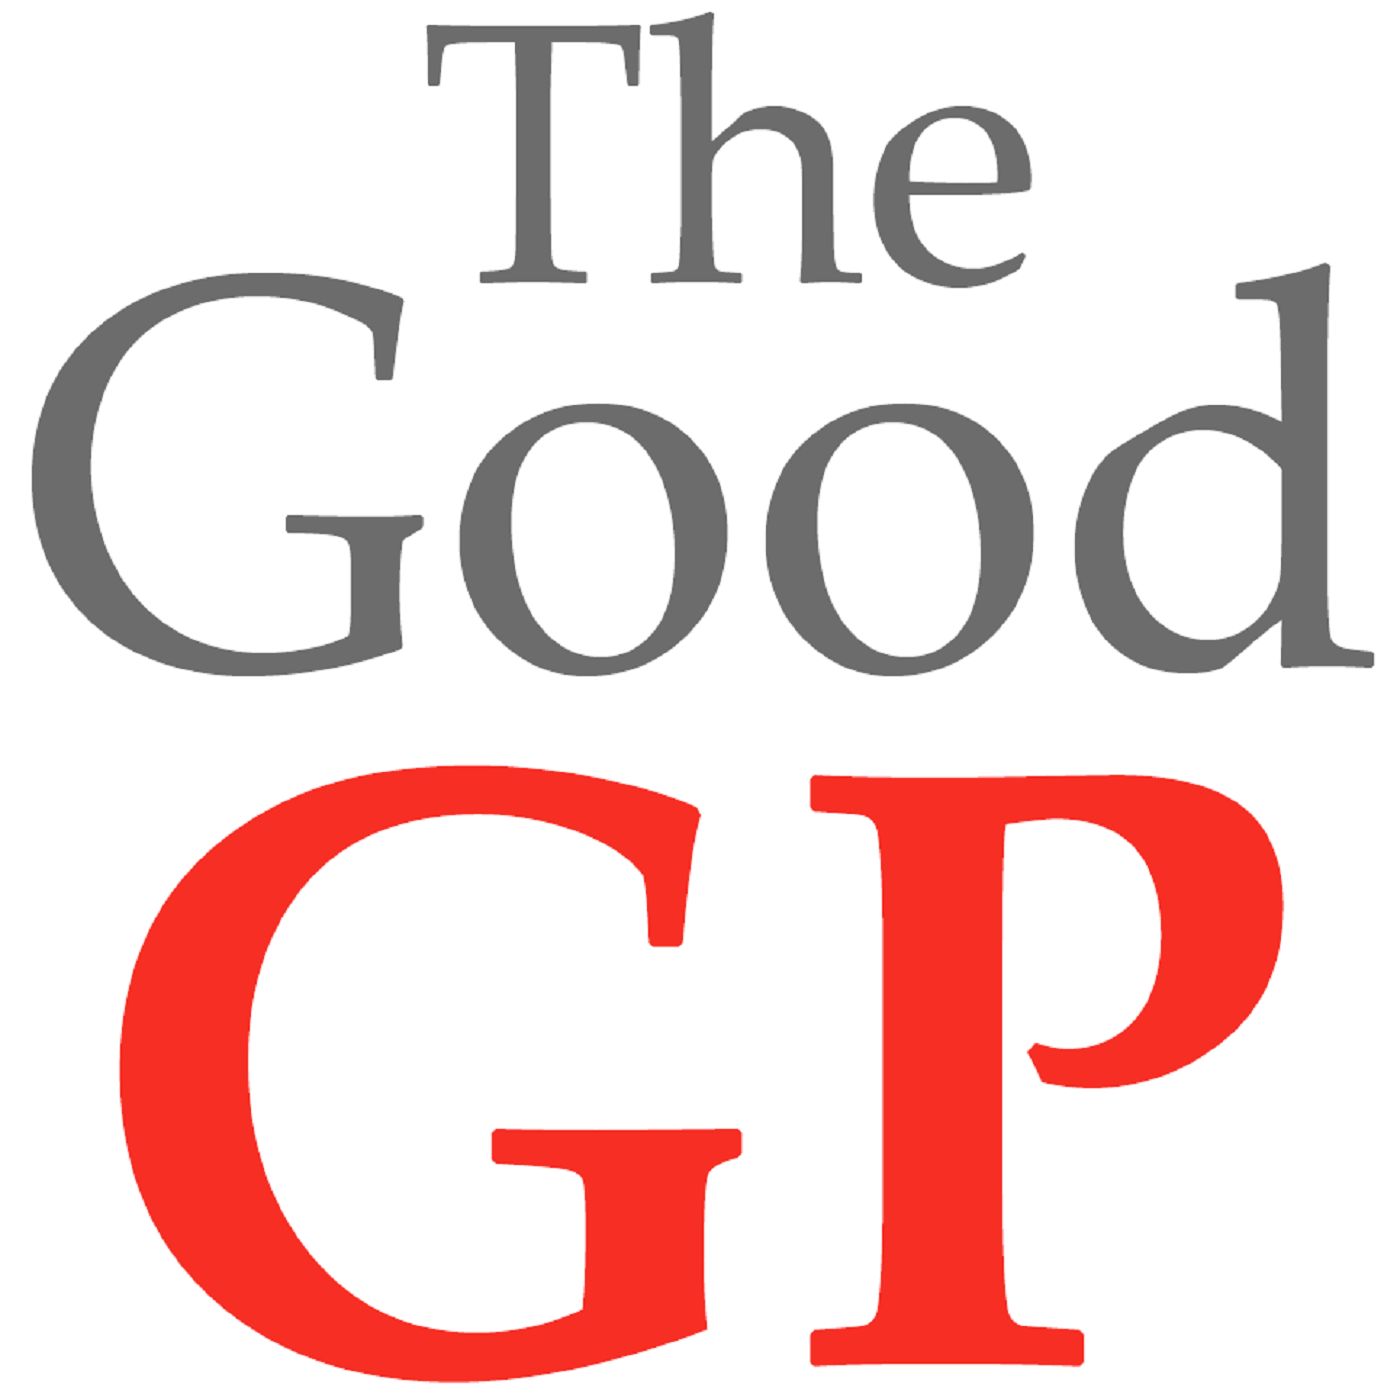 Addressing Intimate Partner Violence: A Conversation with Dr. Alison Creagh on The Good GP